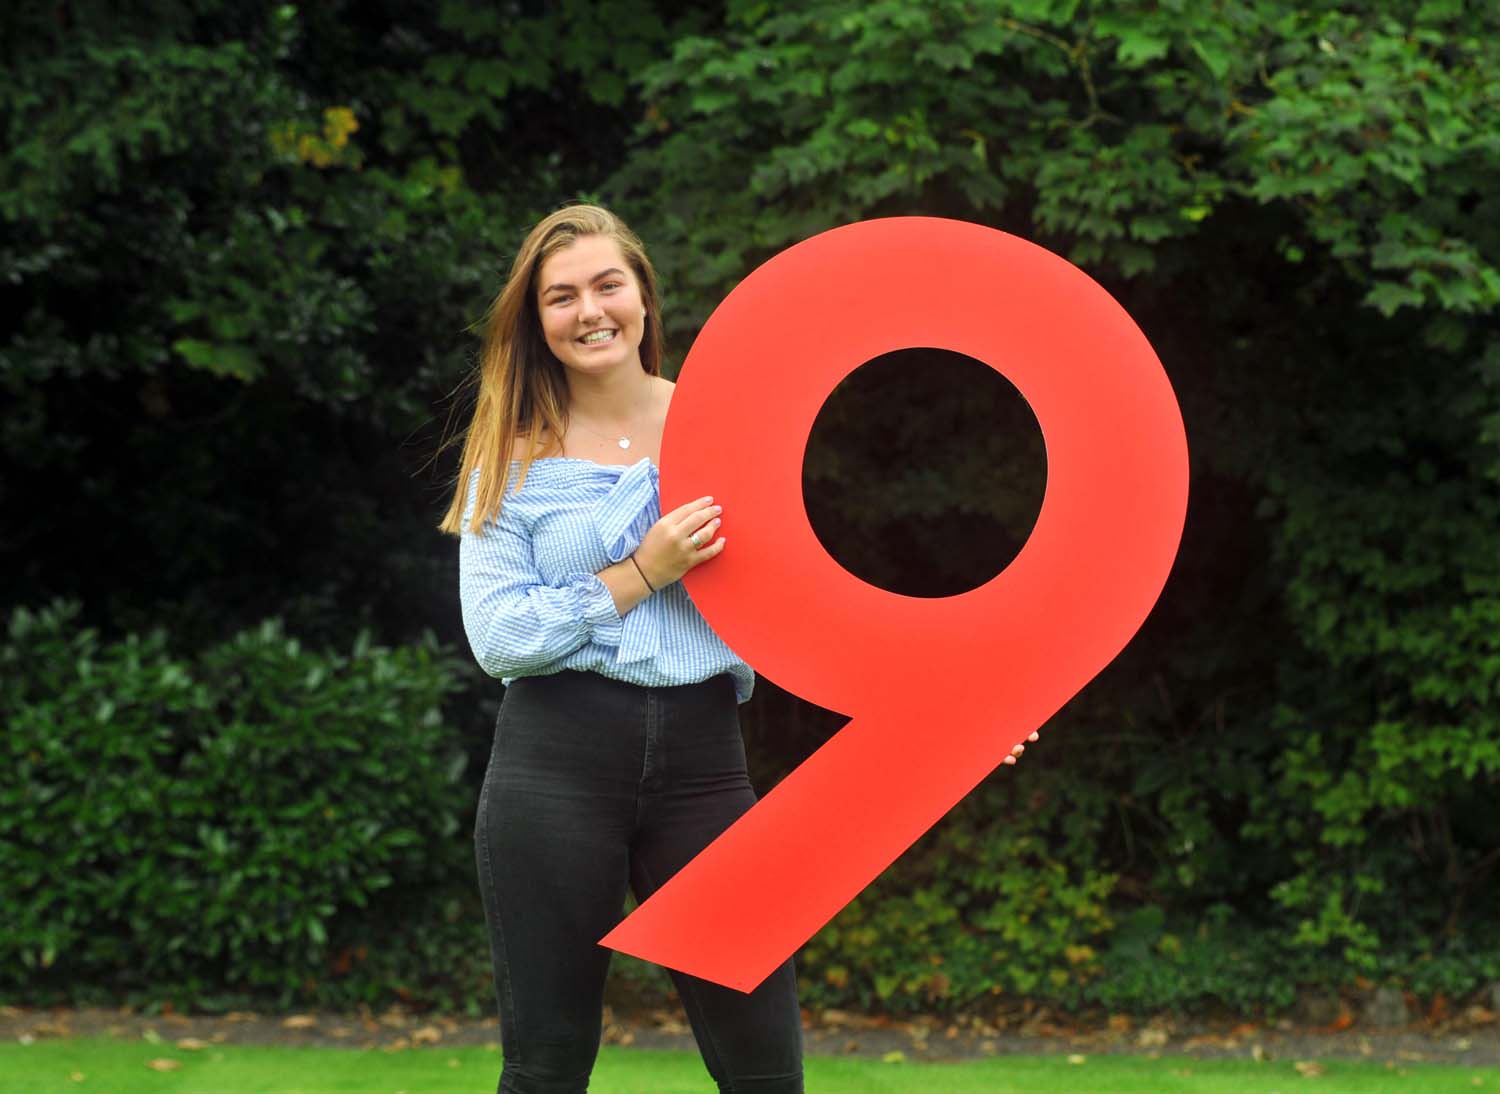 Lucy Irvine, Harrogate Ladies’ College pupil, whose GCSE grades included 6 A*s and an A